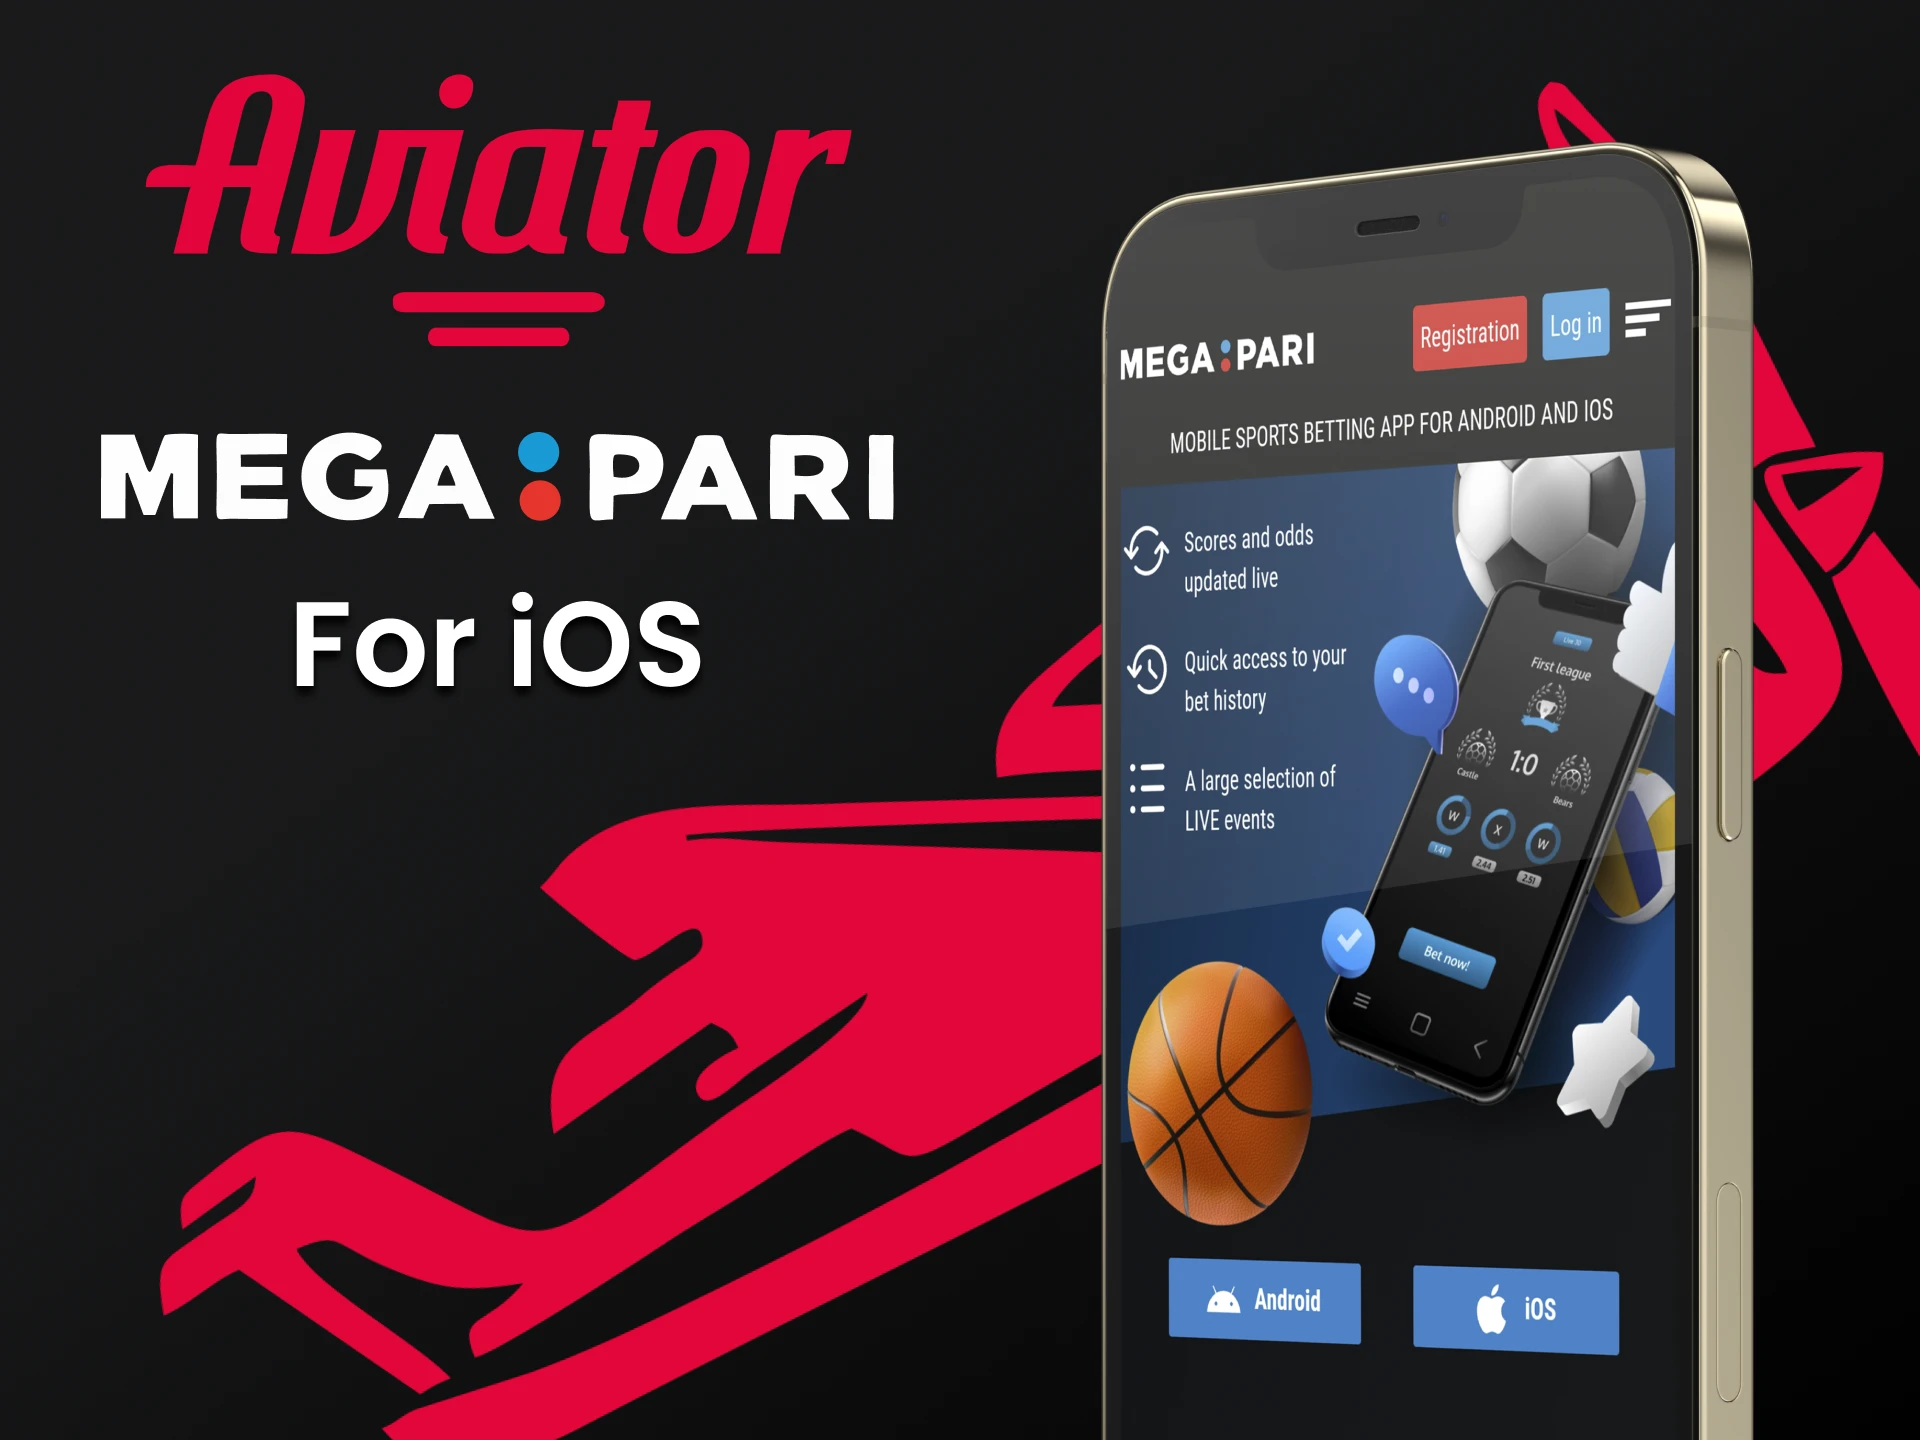 Download the Megapari app for iOS to play Aviator.